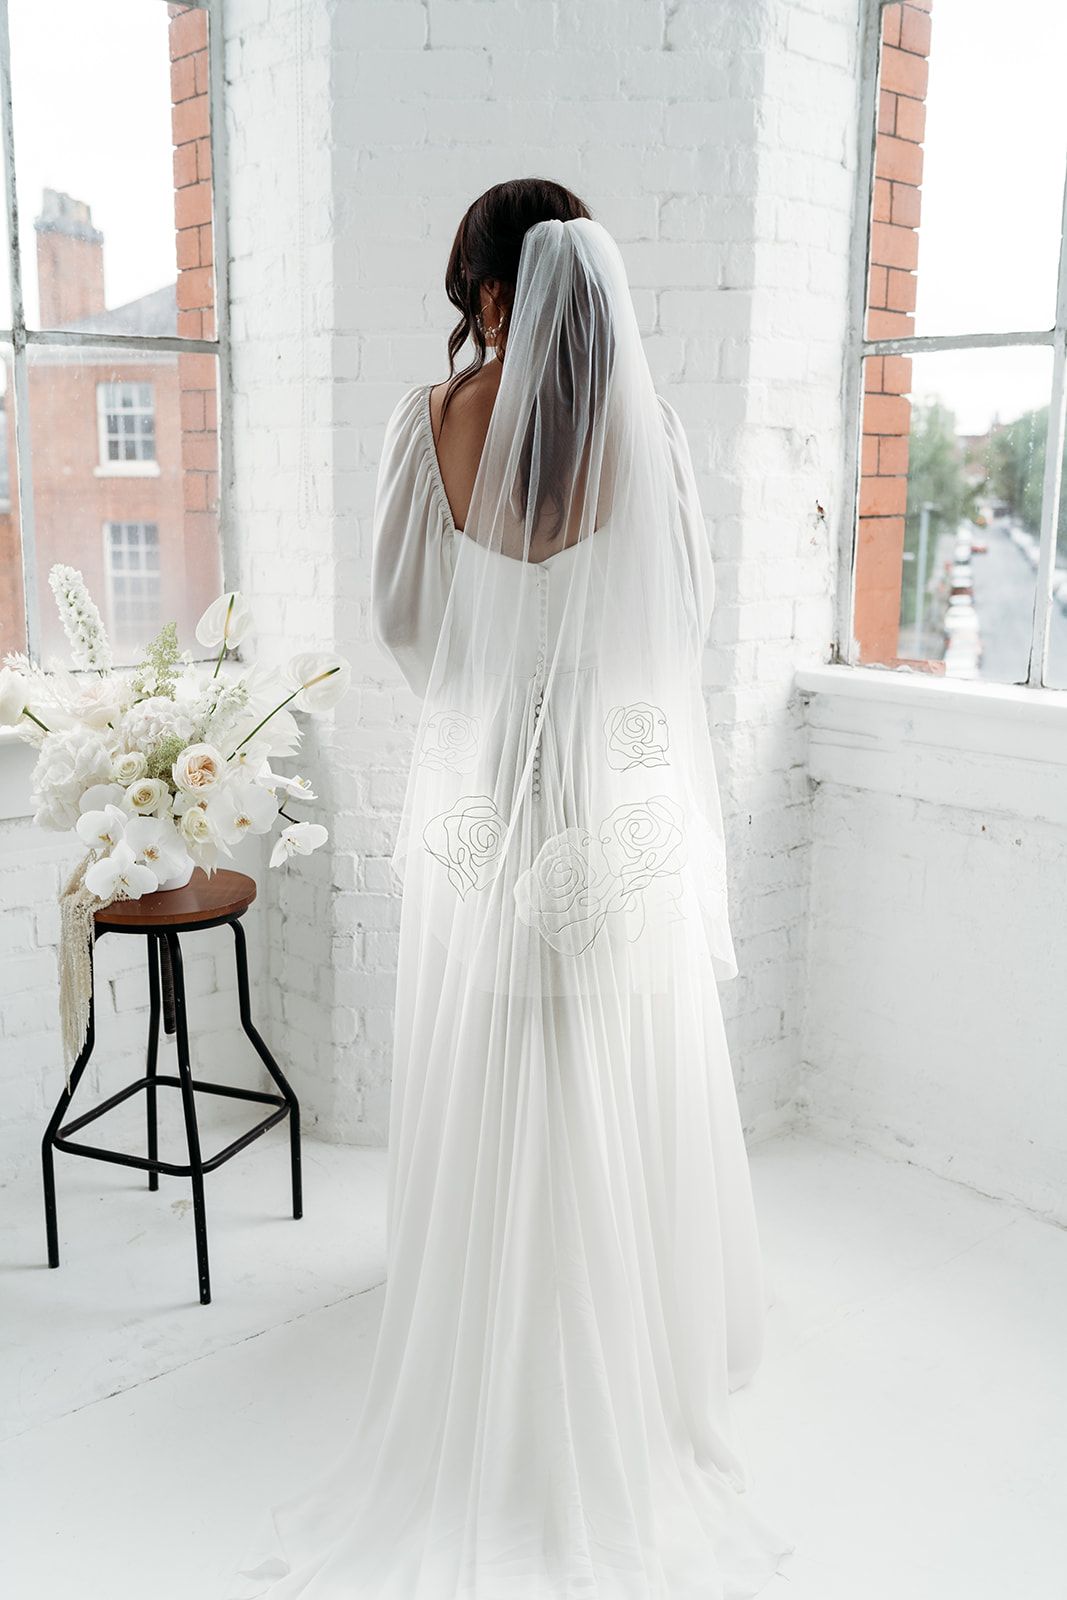 43 Gorgeous Off the Shoulder Wedding Dresses - hitched.co.uk - hitched.co.uk